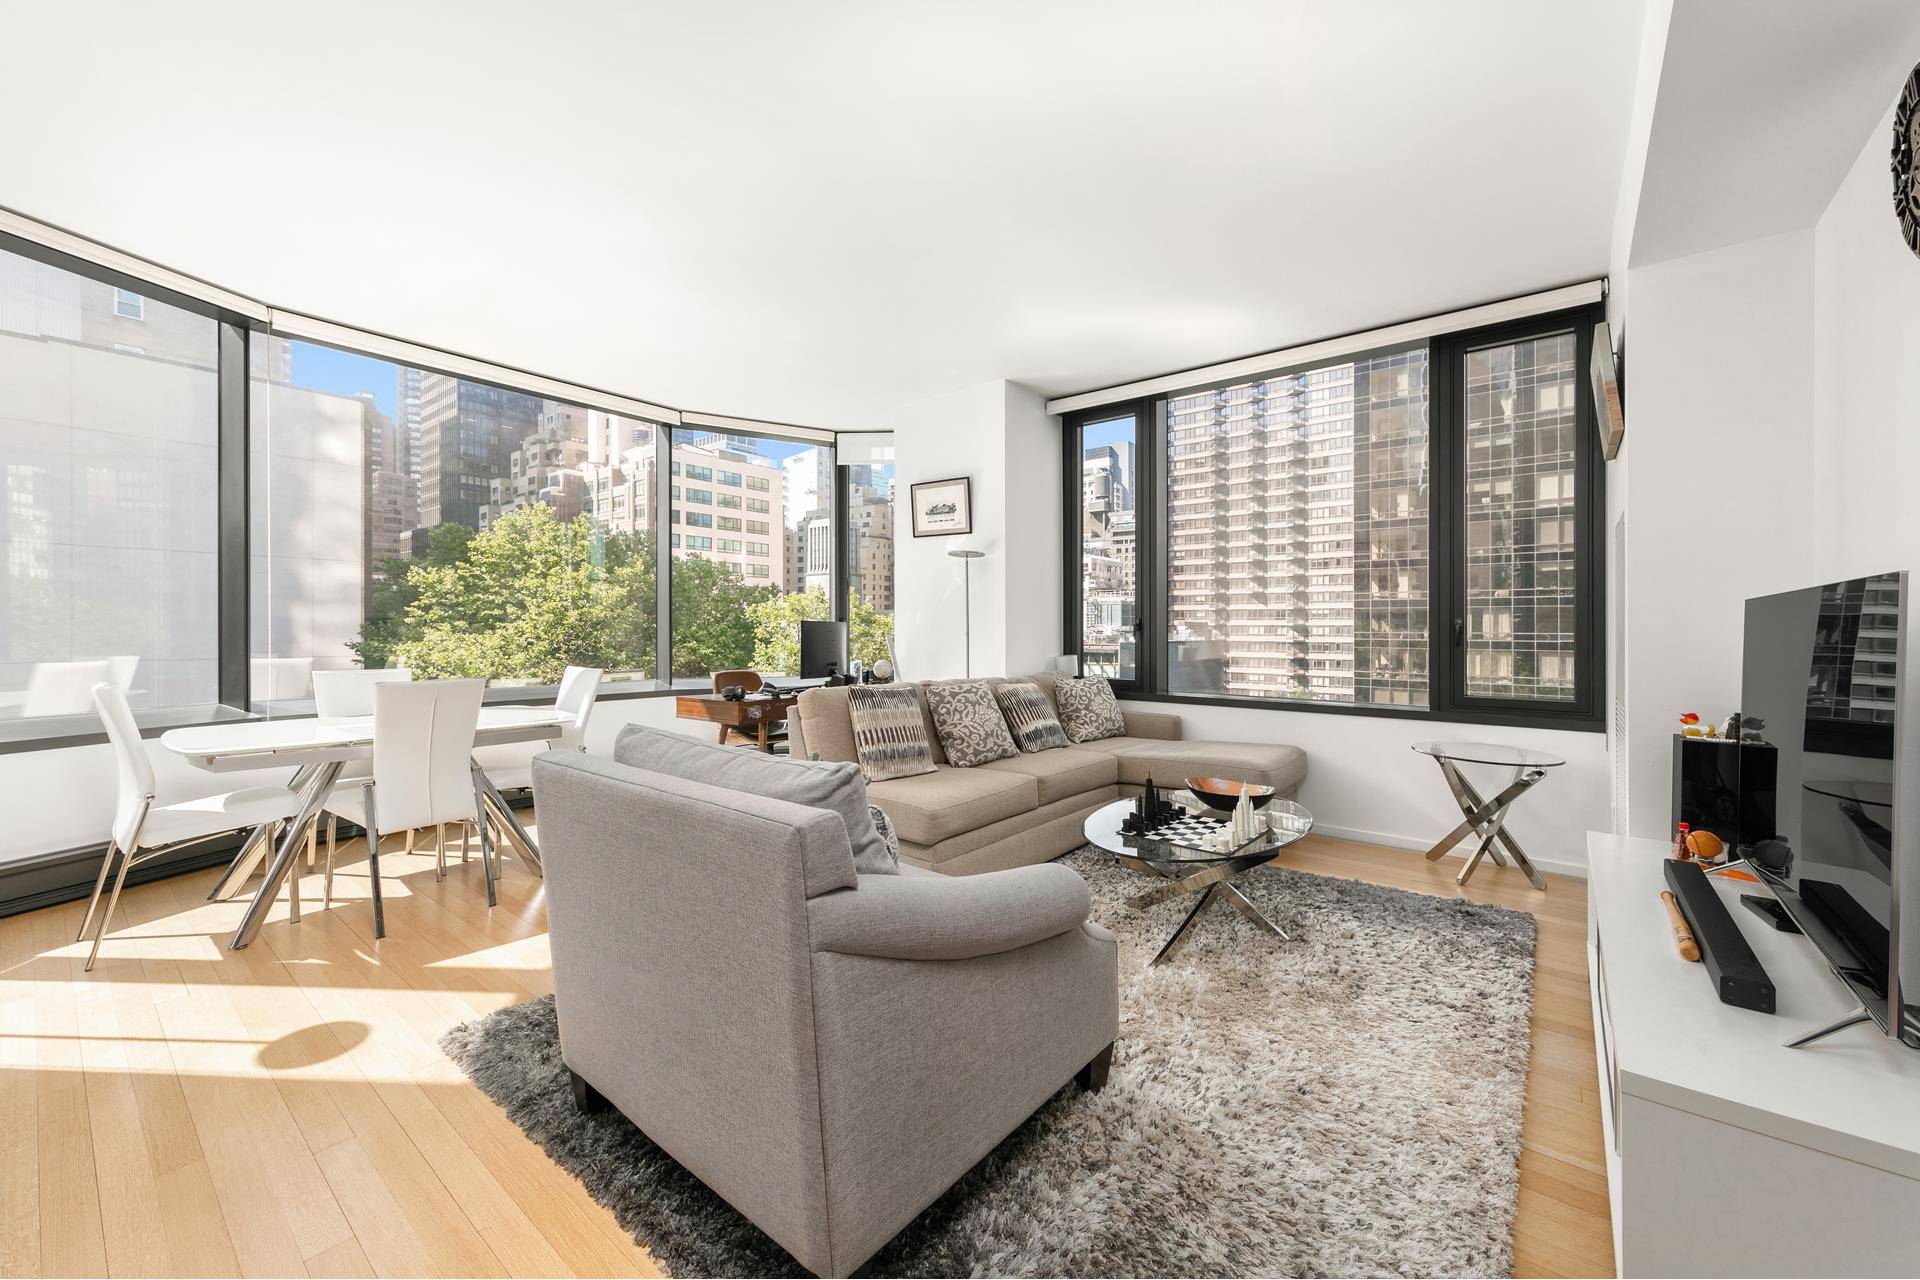 RESALE Spacious and bright, 2 Bedroom, 2 Bath Condo in one of Turtle Bay's most luxurious buildings 50 United Nations Plaza.